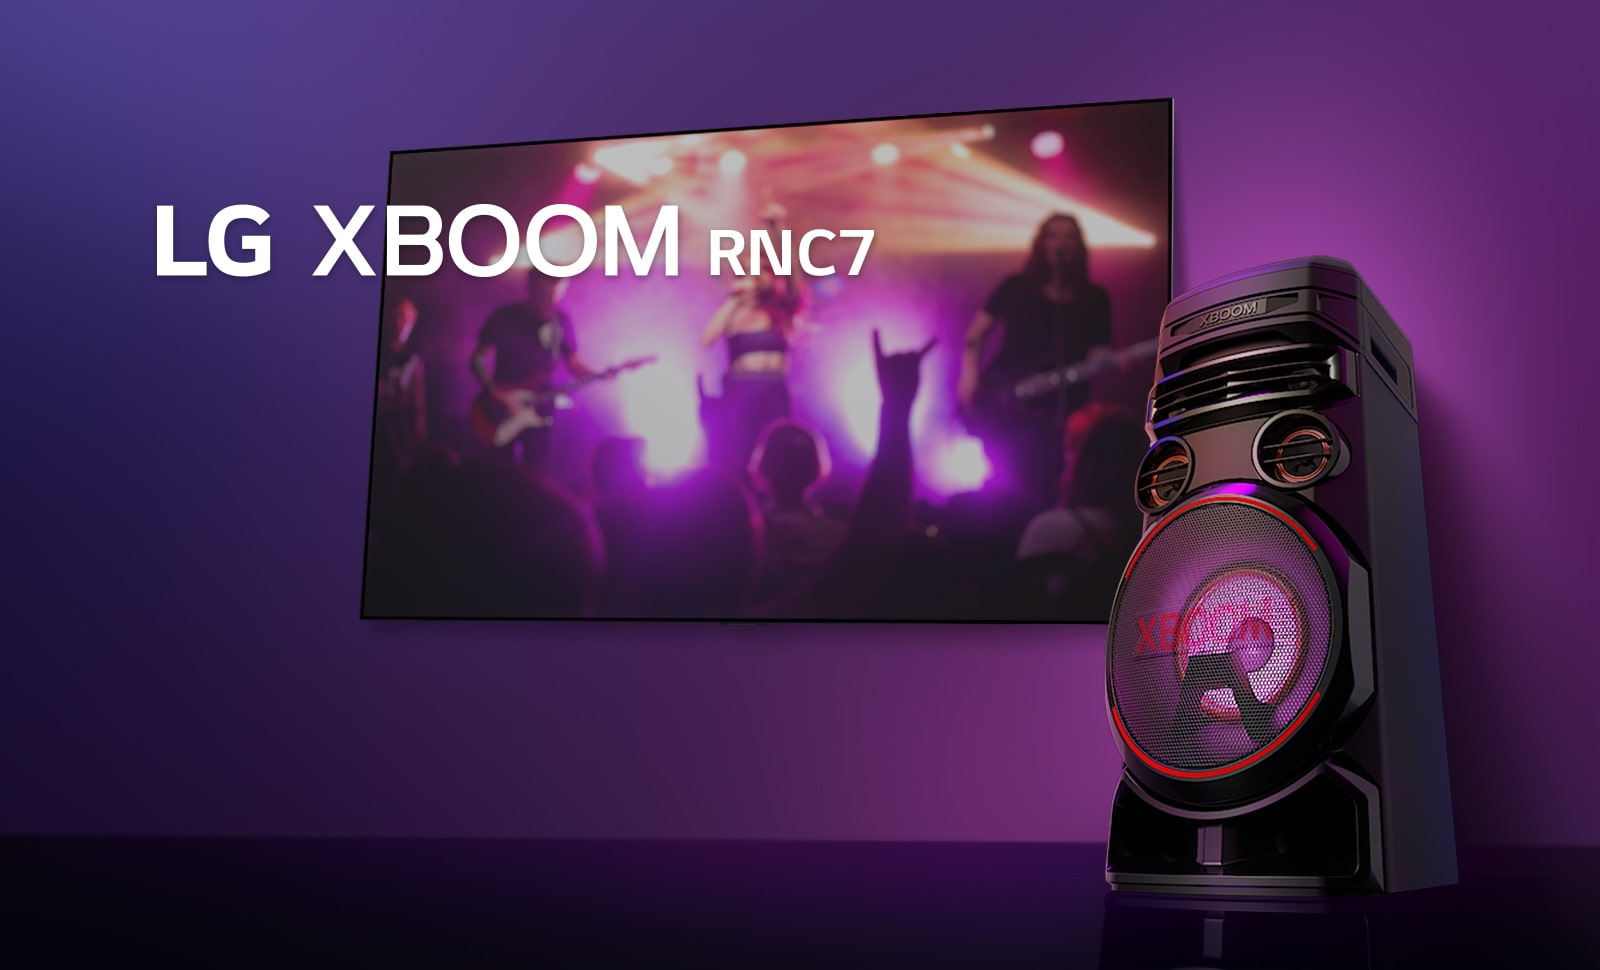 A low angle view of the right side of LG XBOOM rnc7 against a purple background.  The XBOOM light are also purple. And a TV screen displays a concert scene.